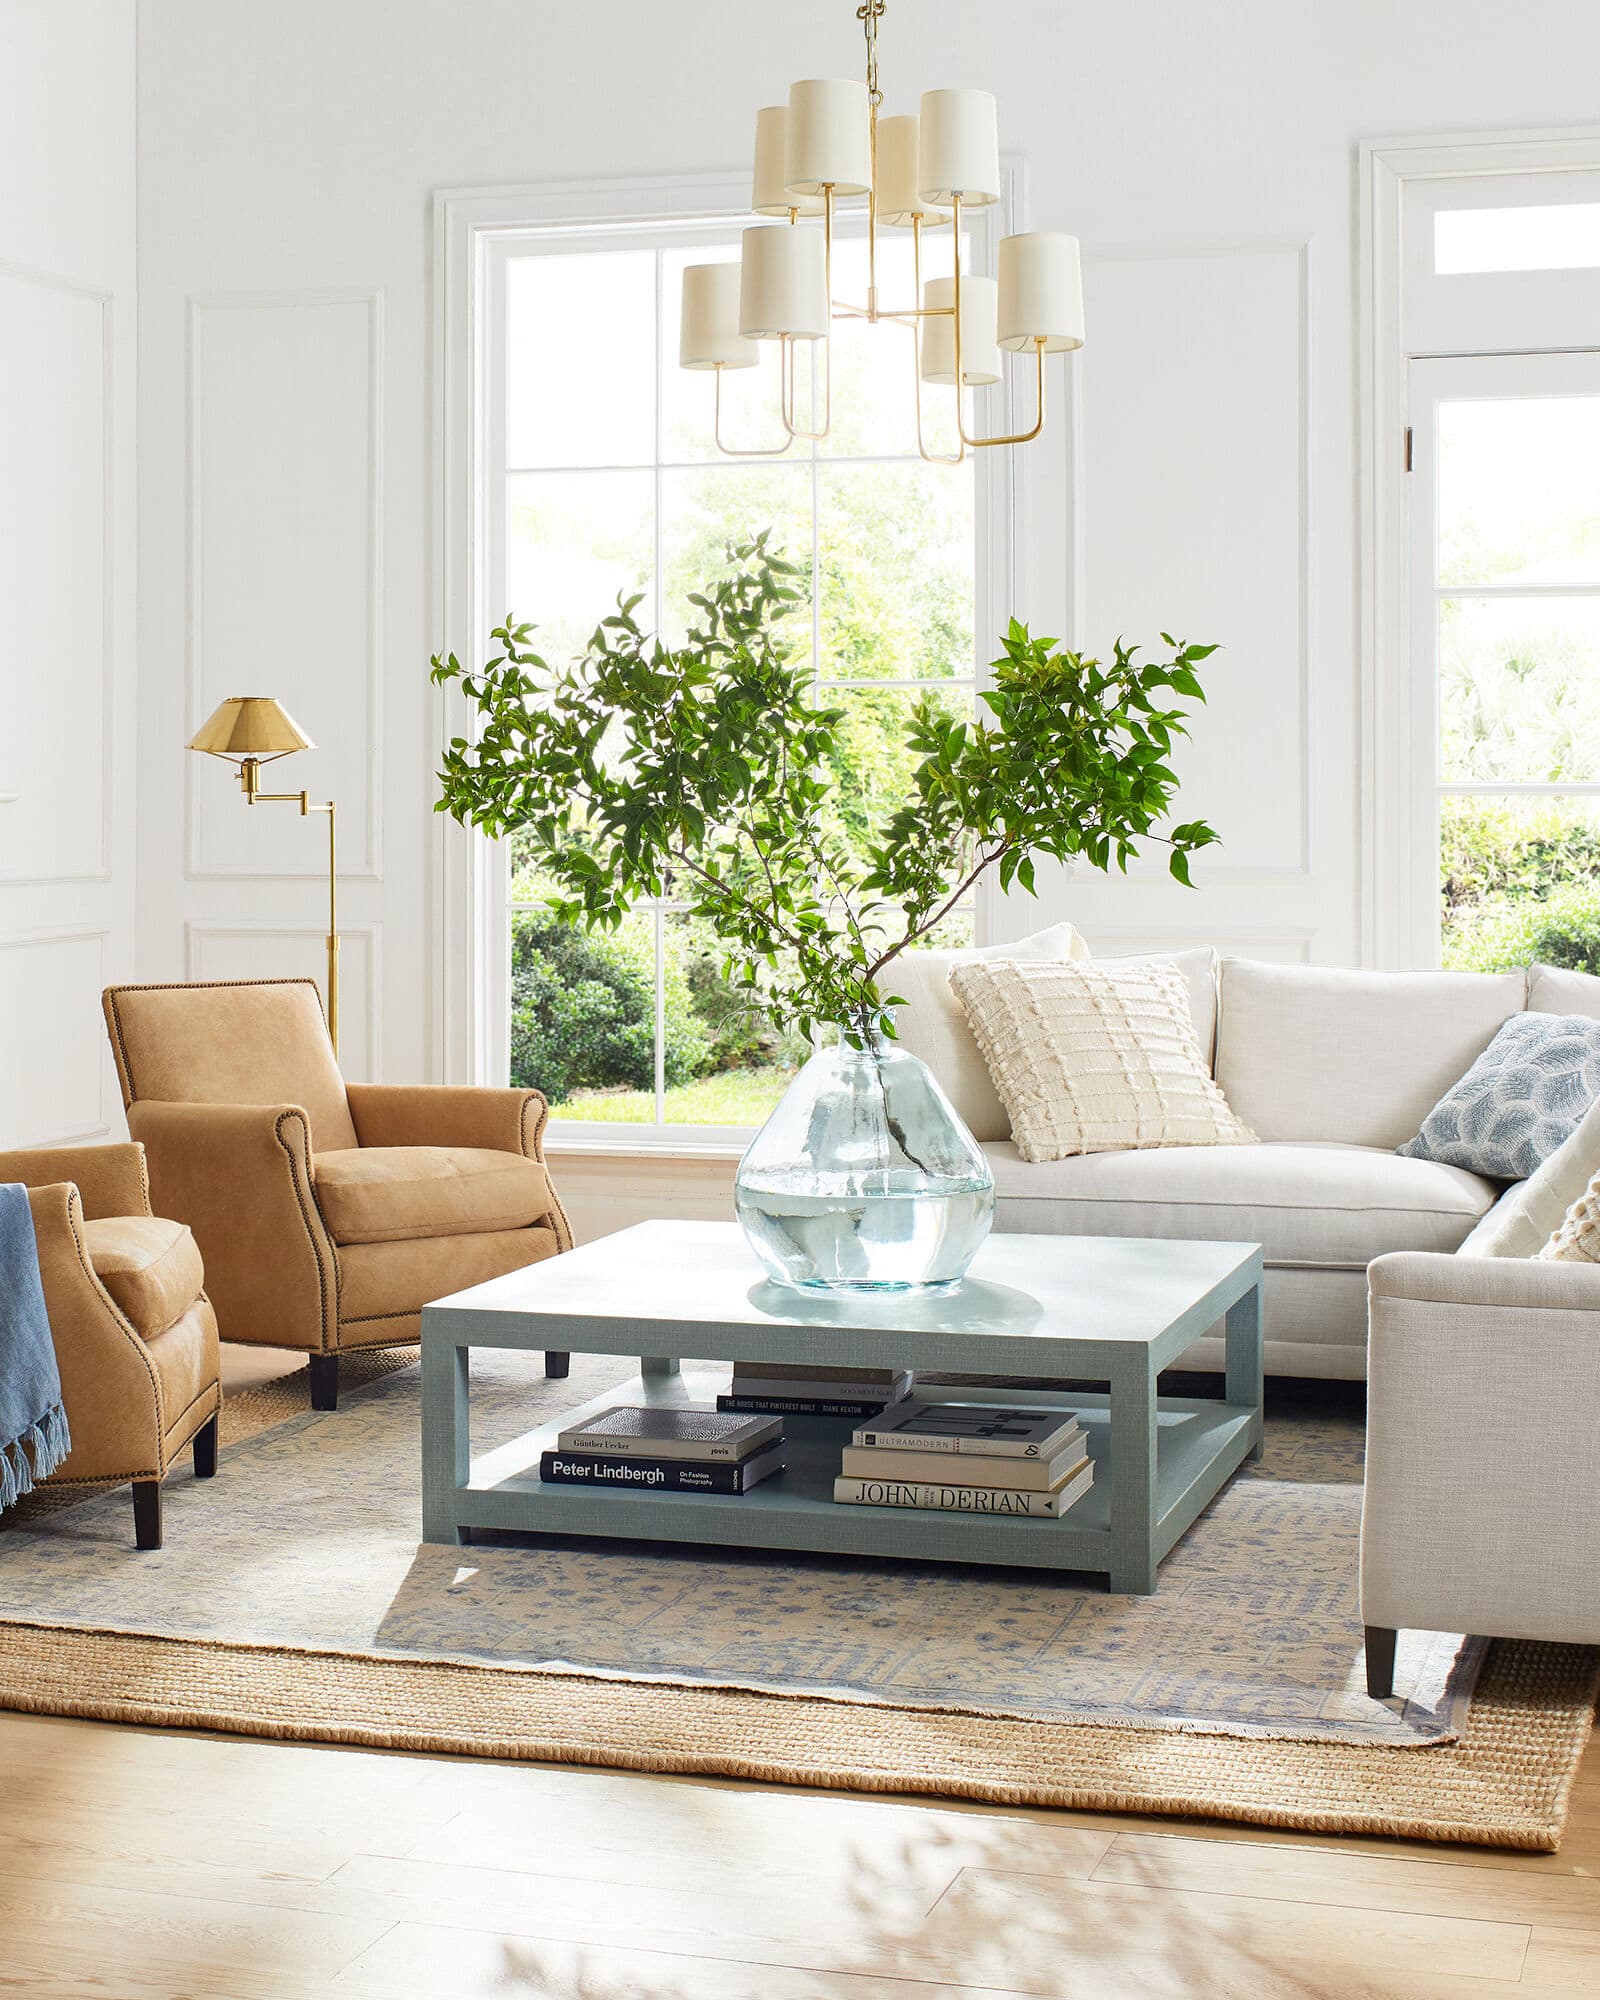 Get a Square Coffee Table for a Gray Sectional